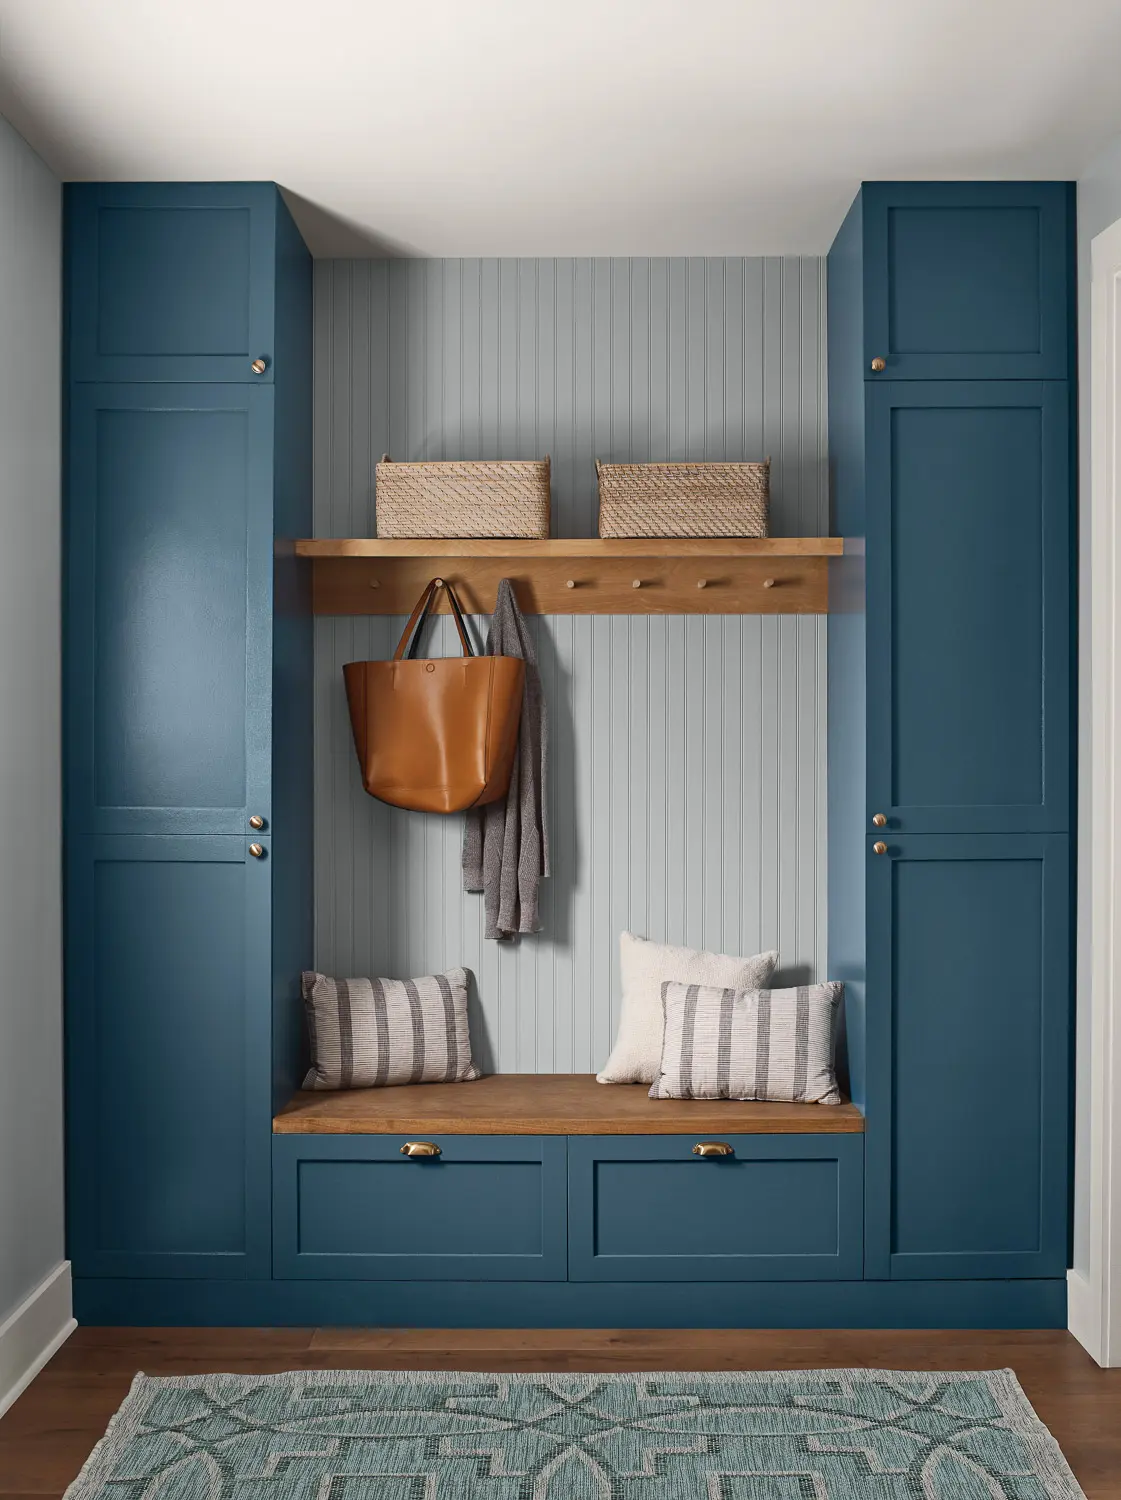 mud room with blue cabinets and a purse hanging on a hook